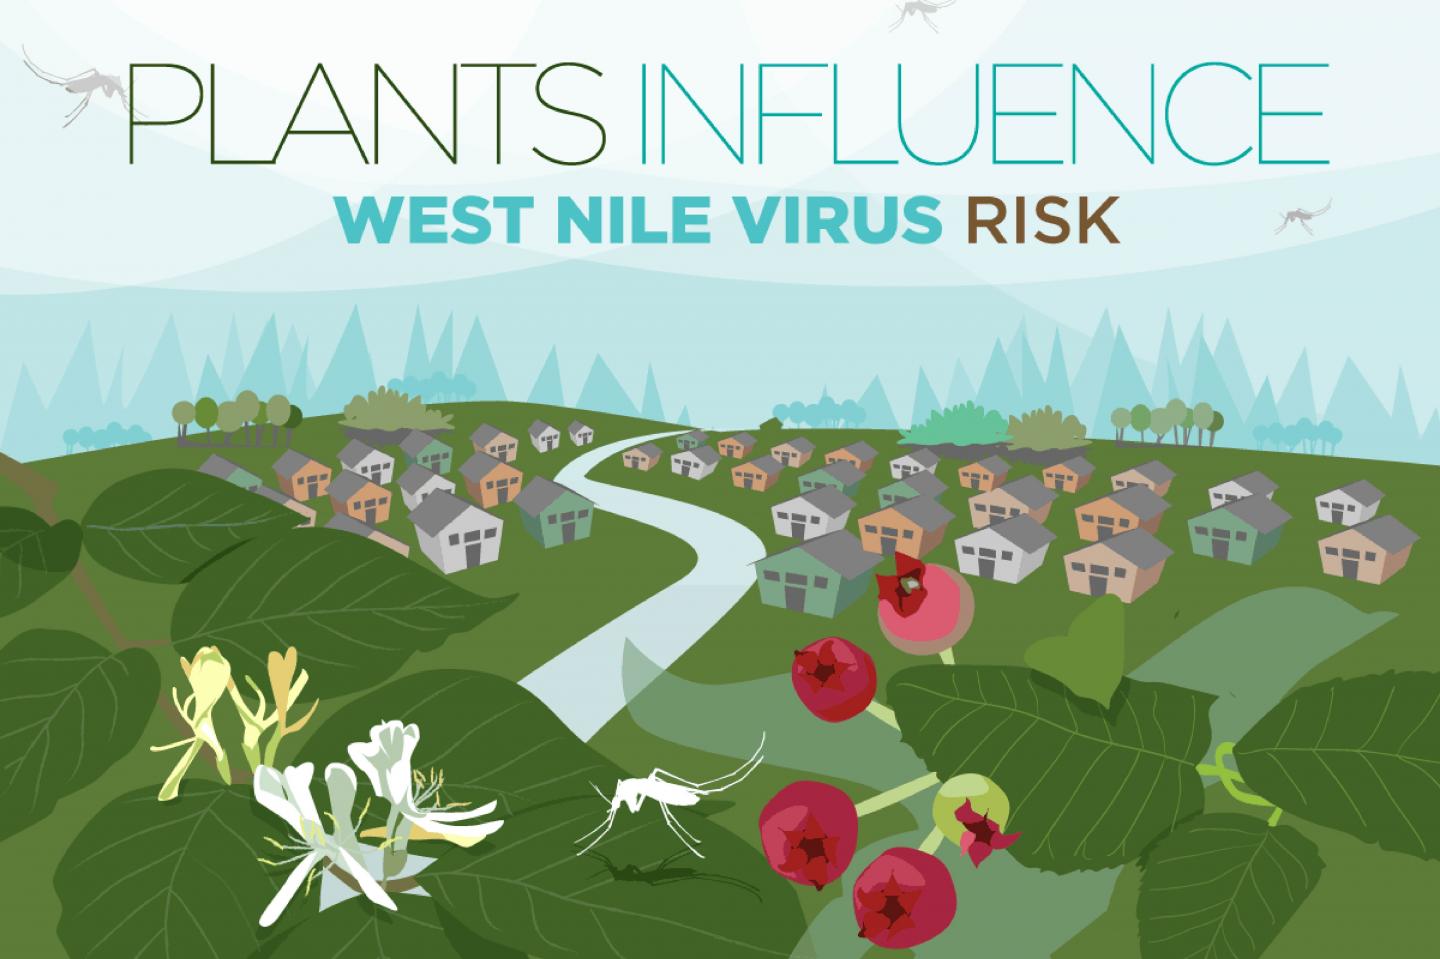 Plants and West Nile Virus Risk